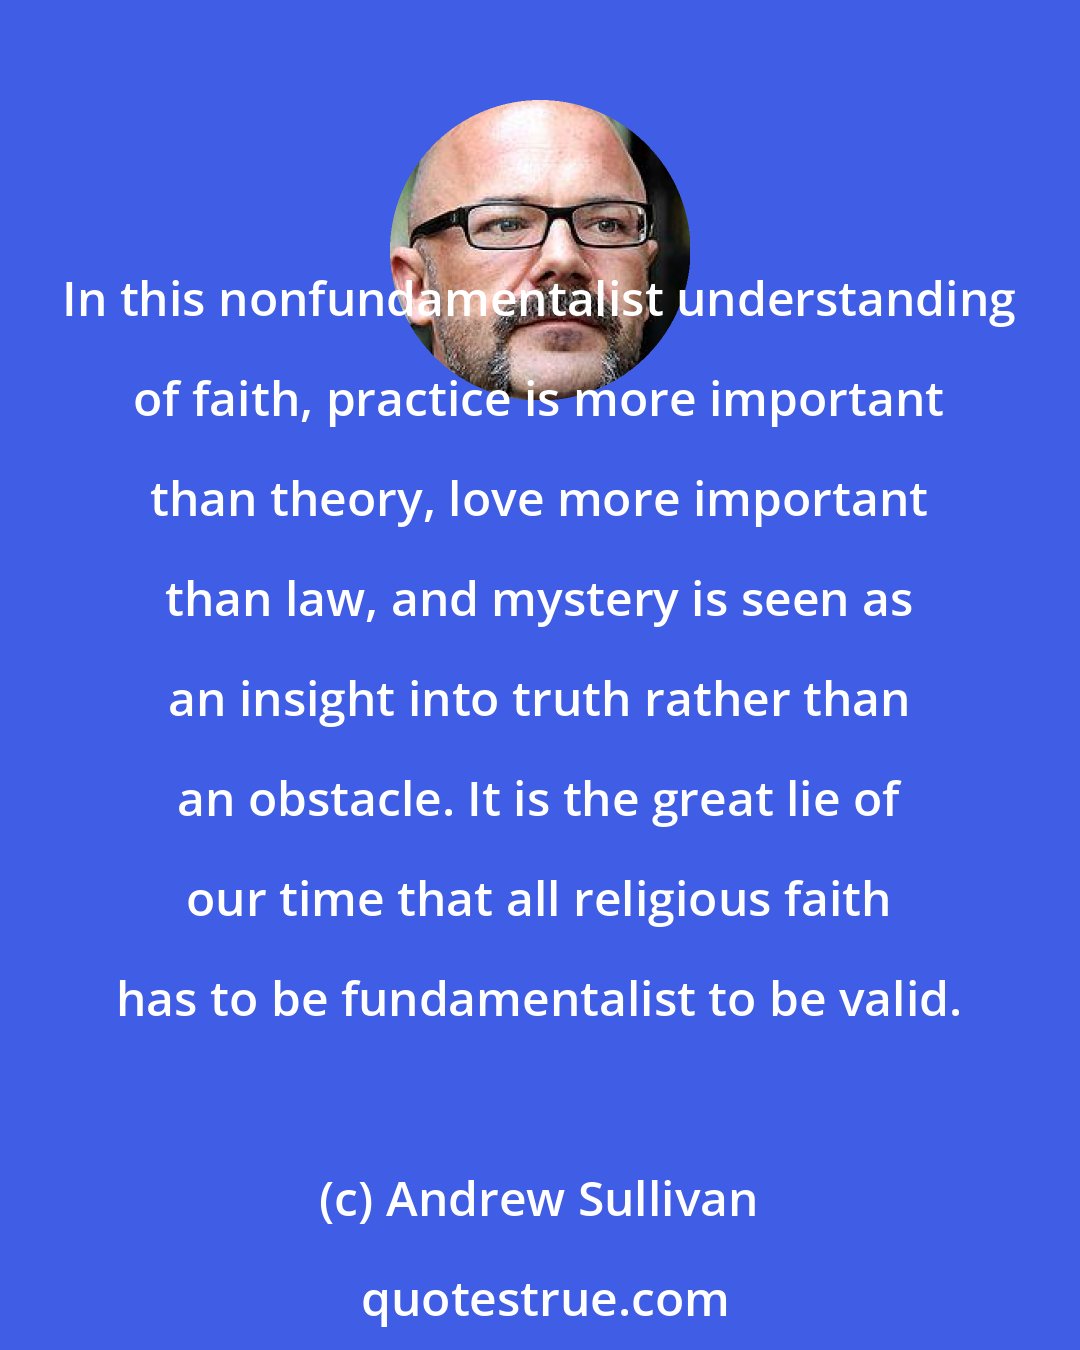 Andrew Sullivan: In this nonfundamentalist understanding of faith, practice is more important than theory, love more important than law, and mystery is seen as an insight into truth rather than an obstacle. It is the great lie of our time that all religious faith has to be fundamentalist to be valid.